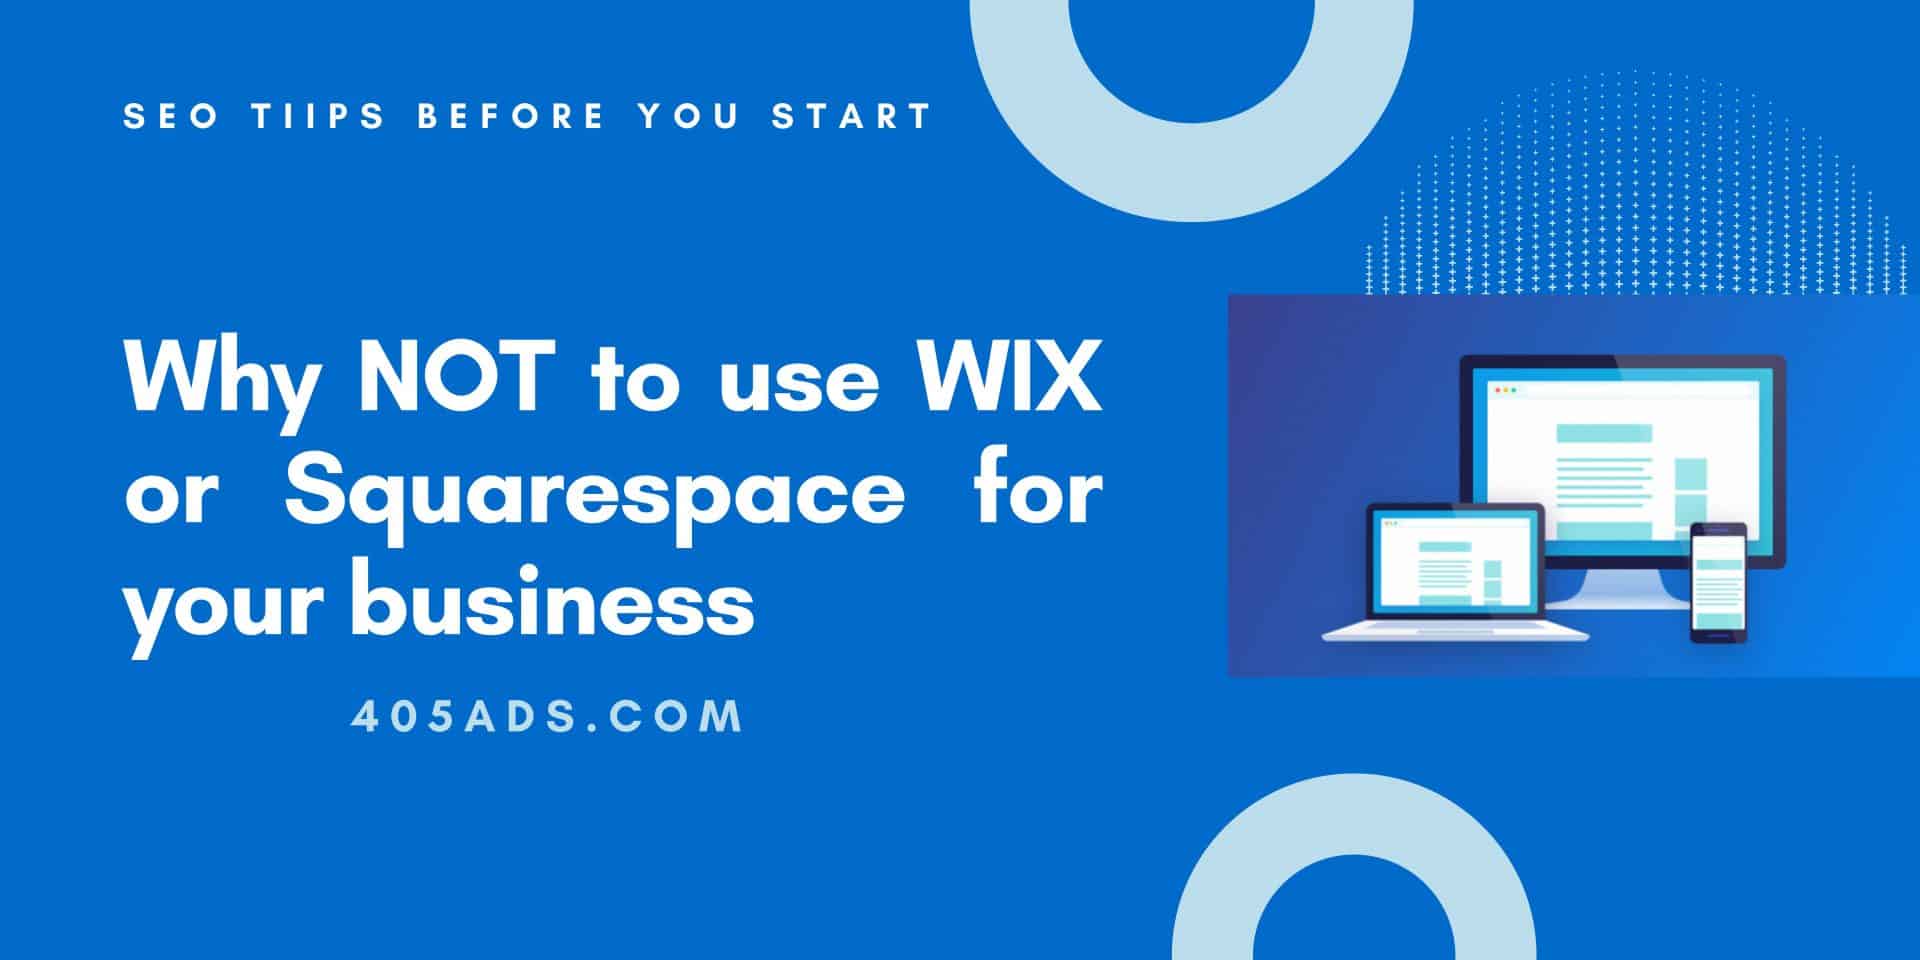 why-not-to-use-wix-and-squarespace-for-seo